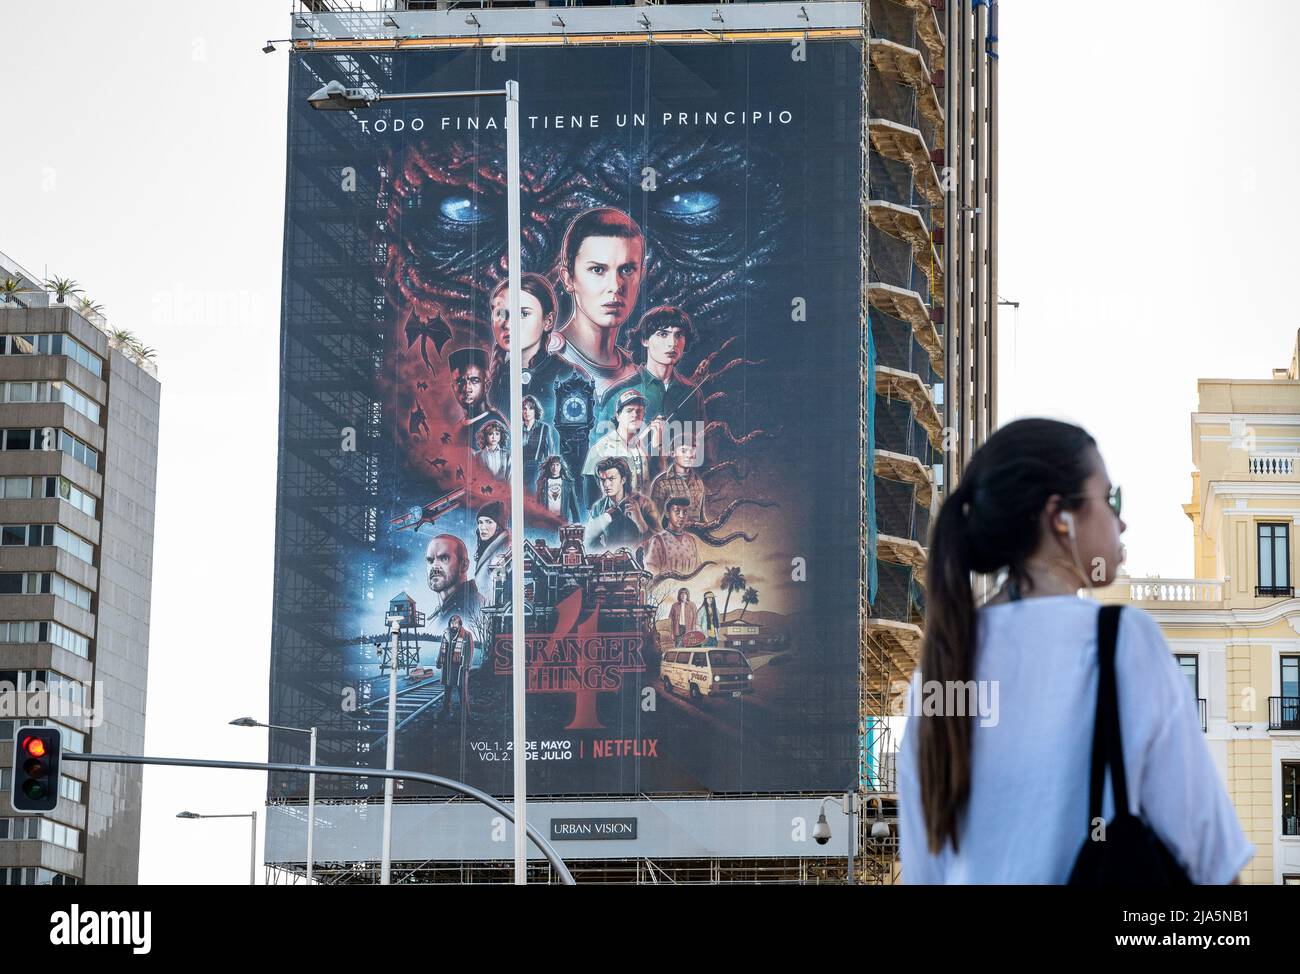 Madrid, Spain. 28th May, 2022. A woman stands opposite of a large street advertisement billboard from the American global on-demand Internet streaming media provider Netflix featuring Stranger Things Season 4 TV show in Spain. Credit: SOPA Images Limited/Alamy Live News Stock Photo